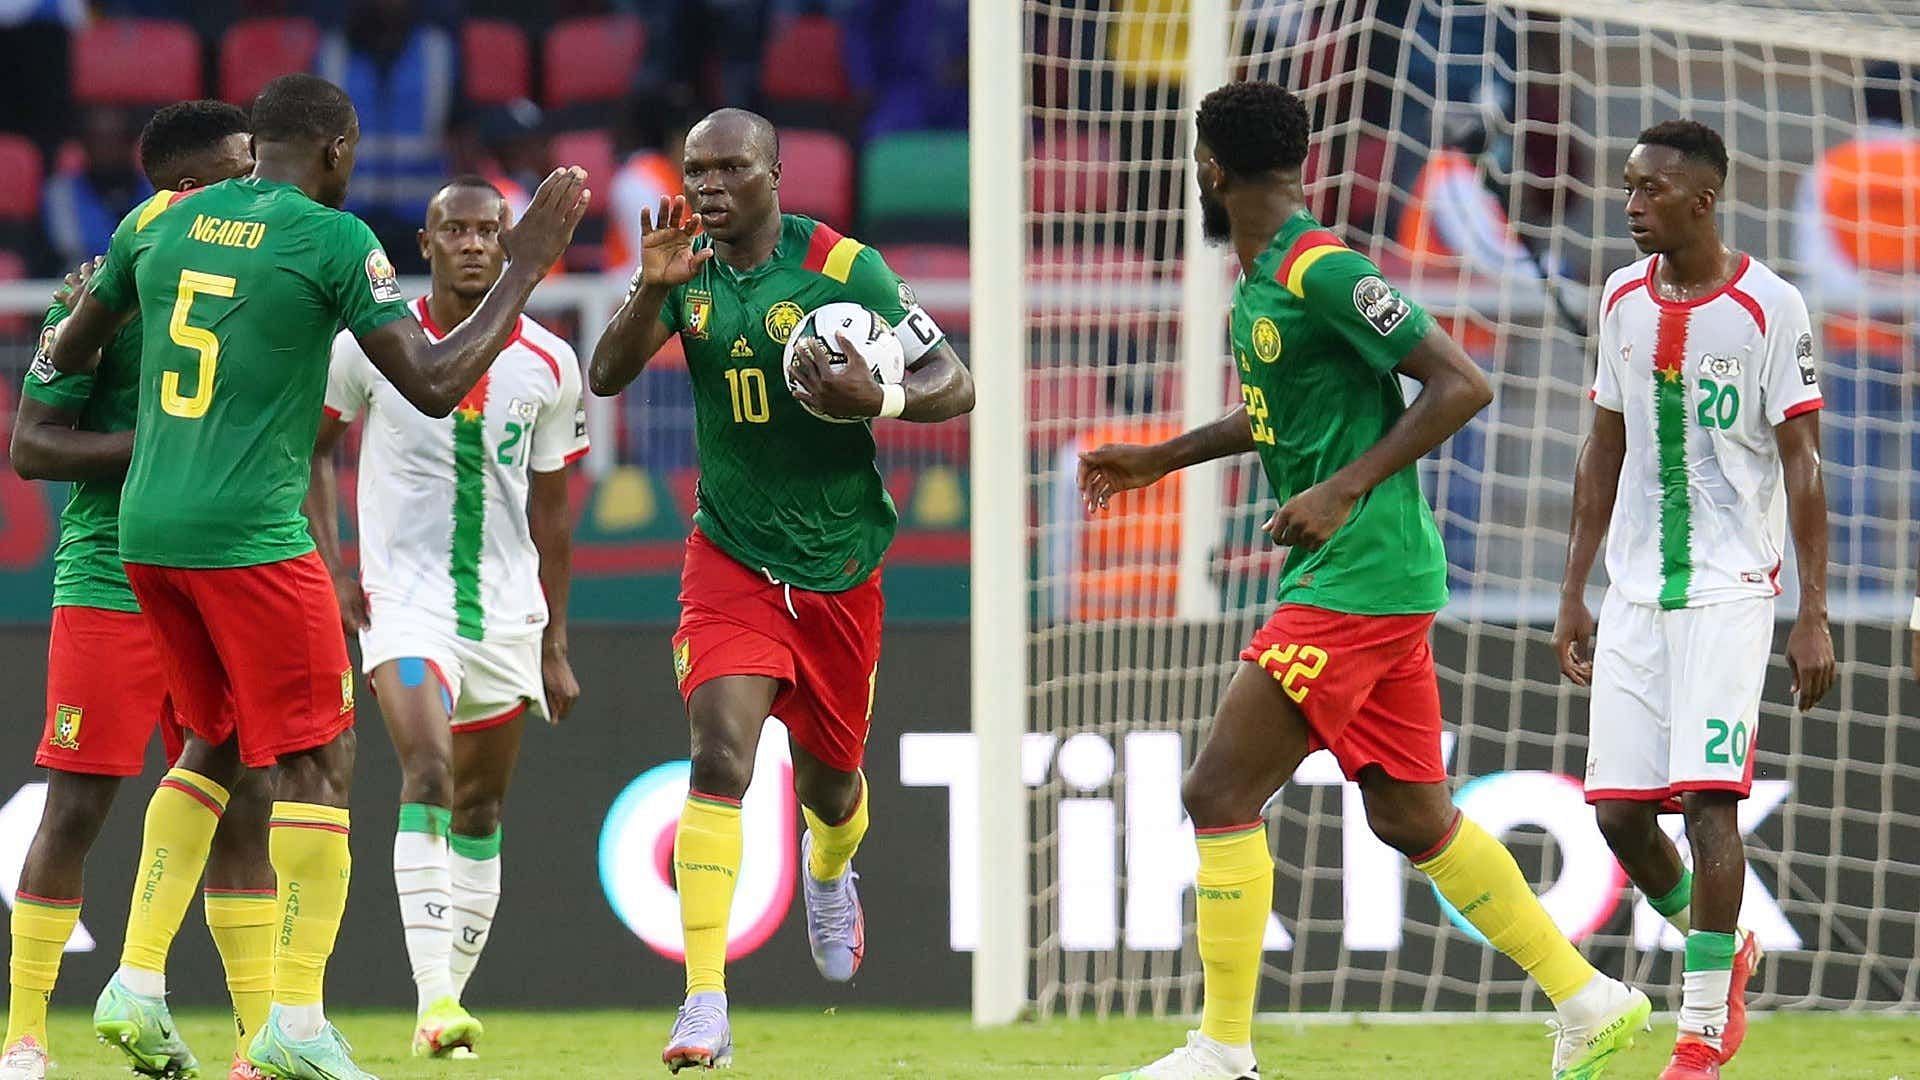 Burkina Faso square off against Cameroon for the third-place at the 2021 AFCON on Saturday